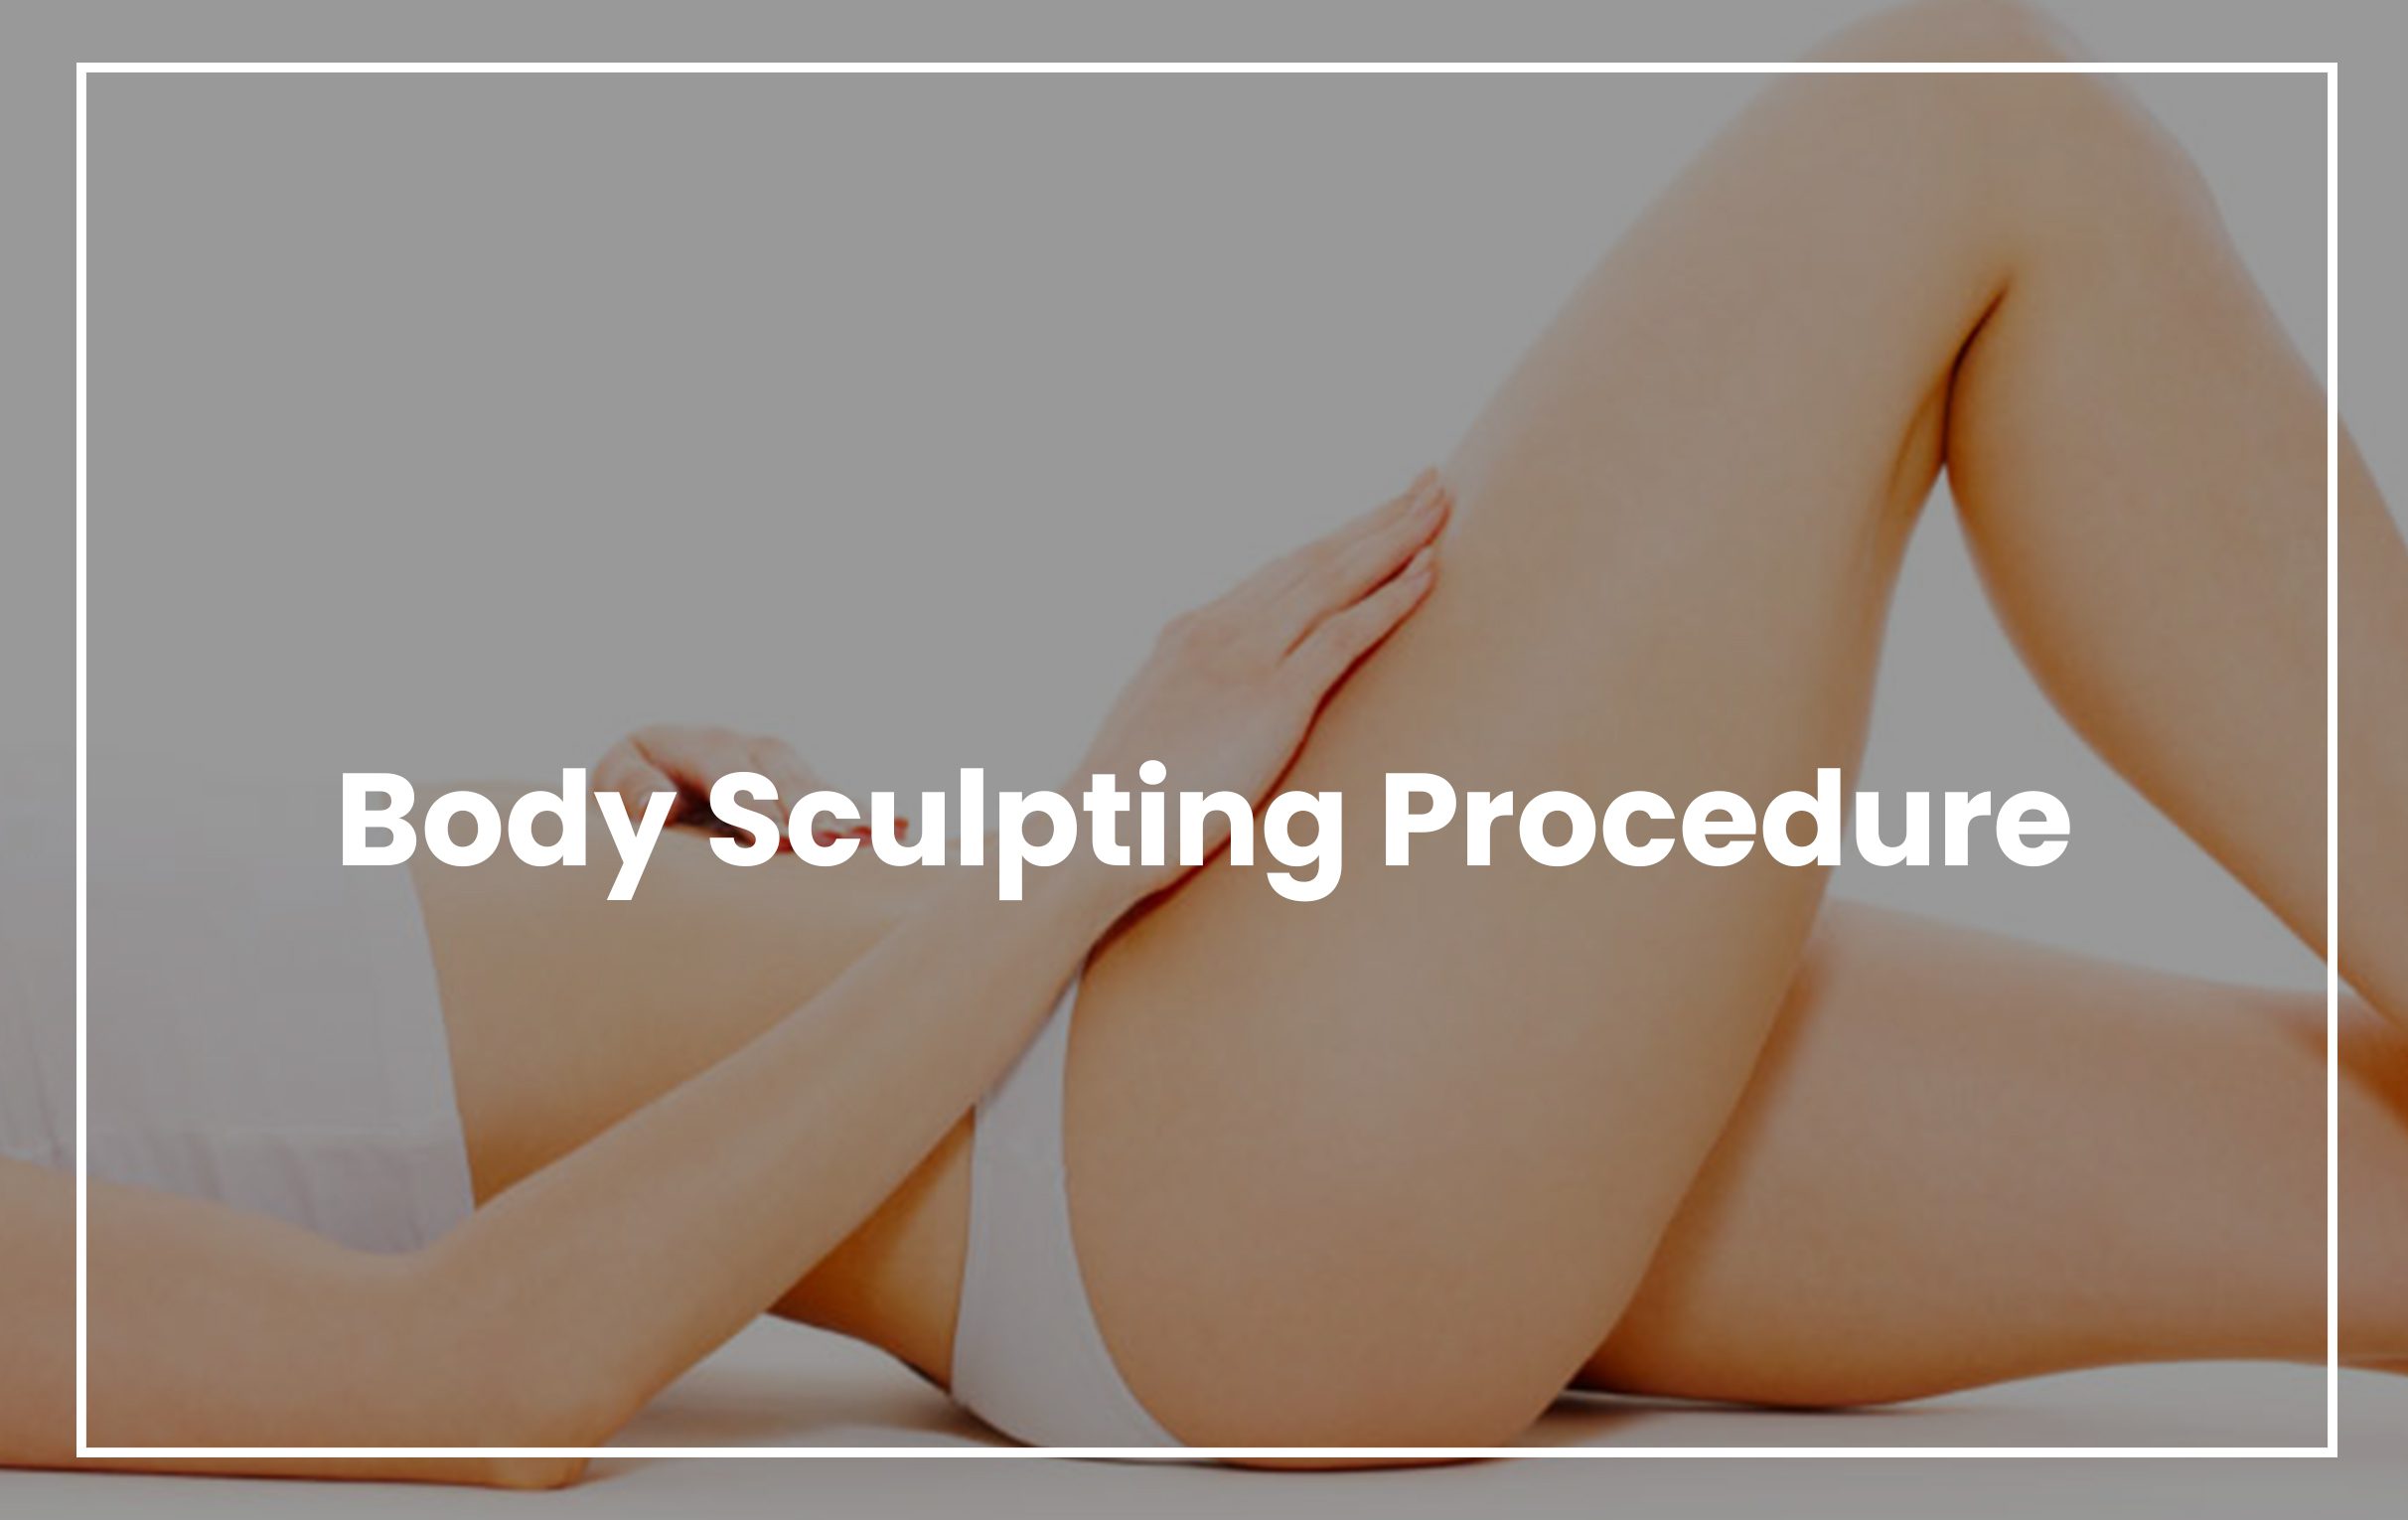 Body Sculpting price list at Rejuvie aesthetic and dermatology Bali